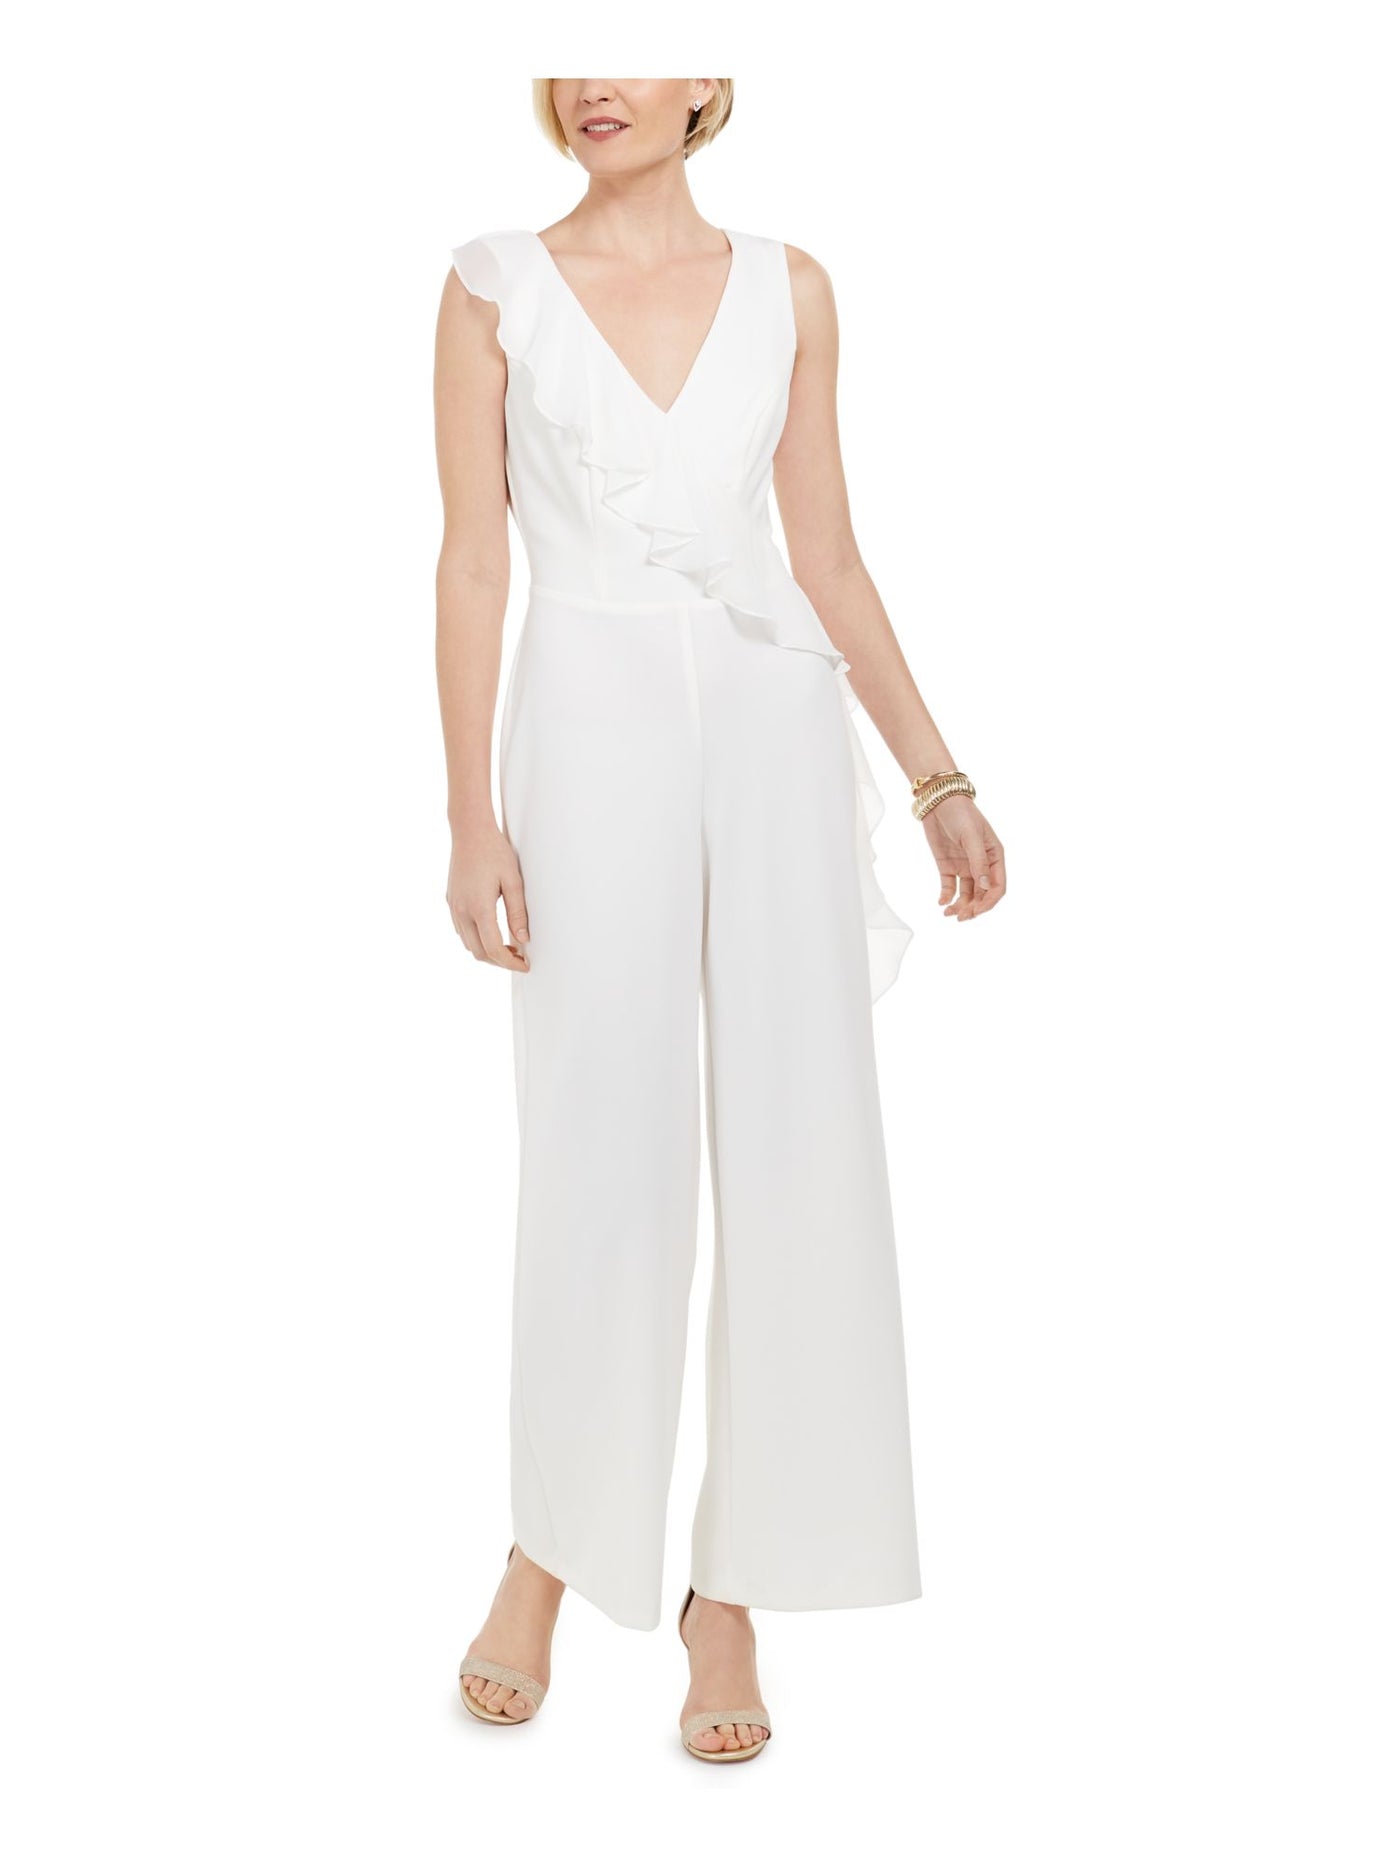 CONNECTED APPAREL Womens Sleeveless V Neck Evening Wide Leg Jumpsuit